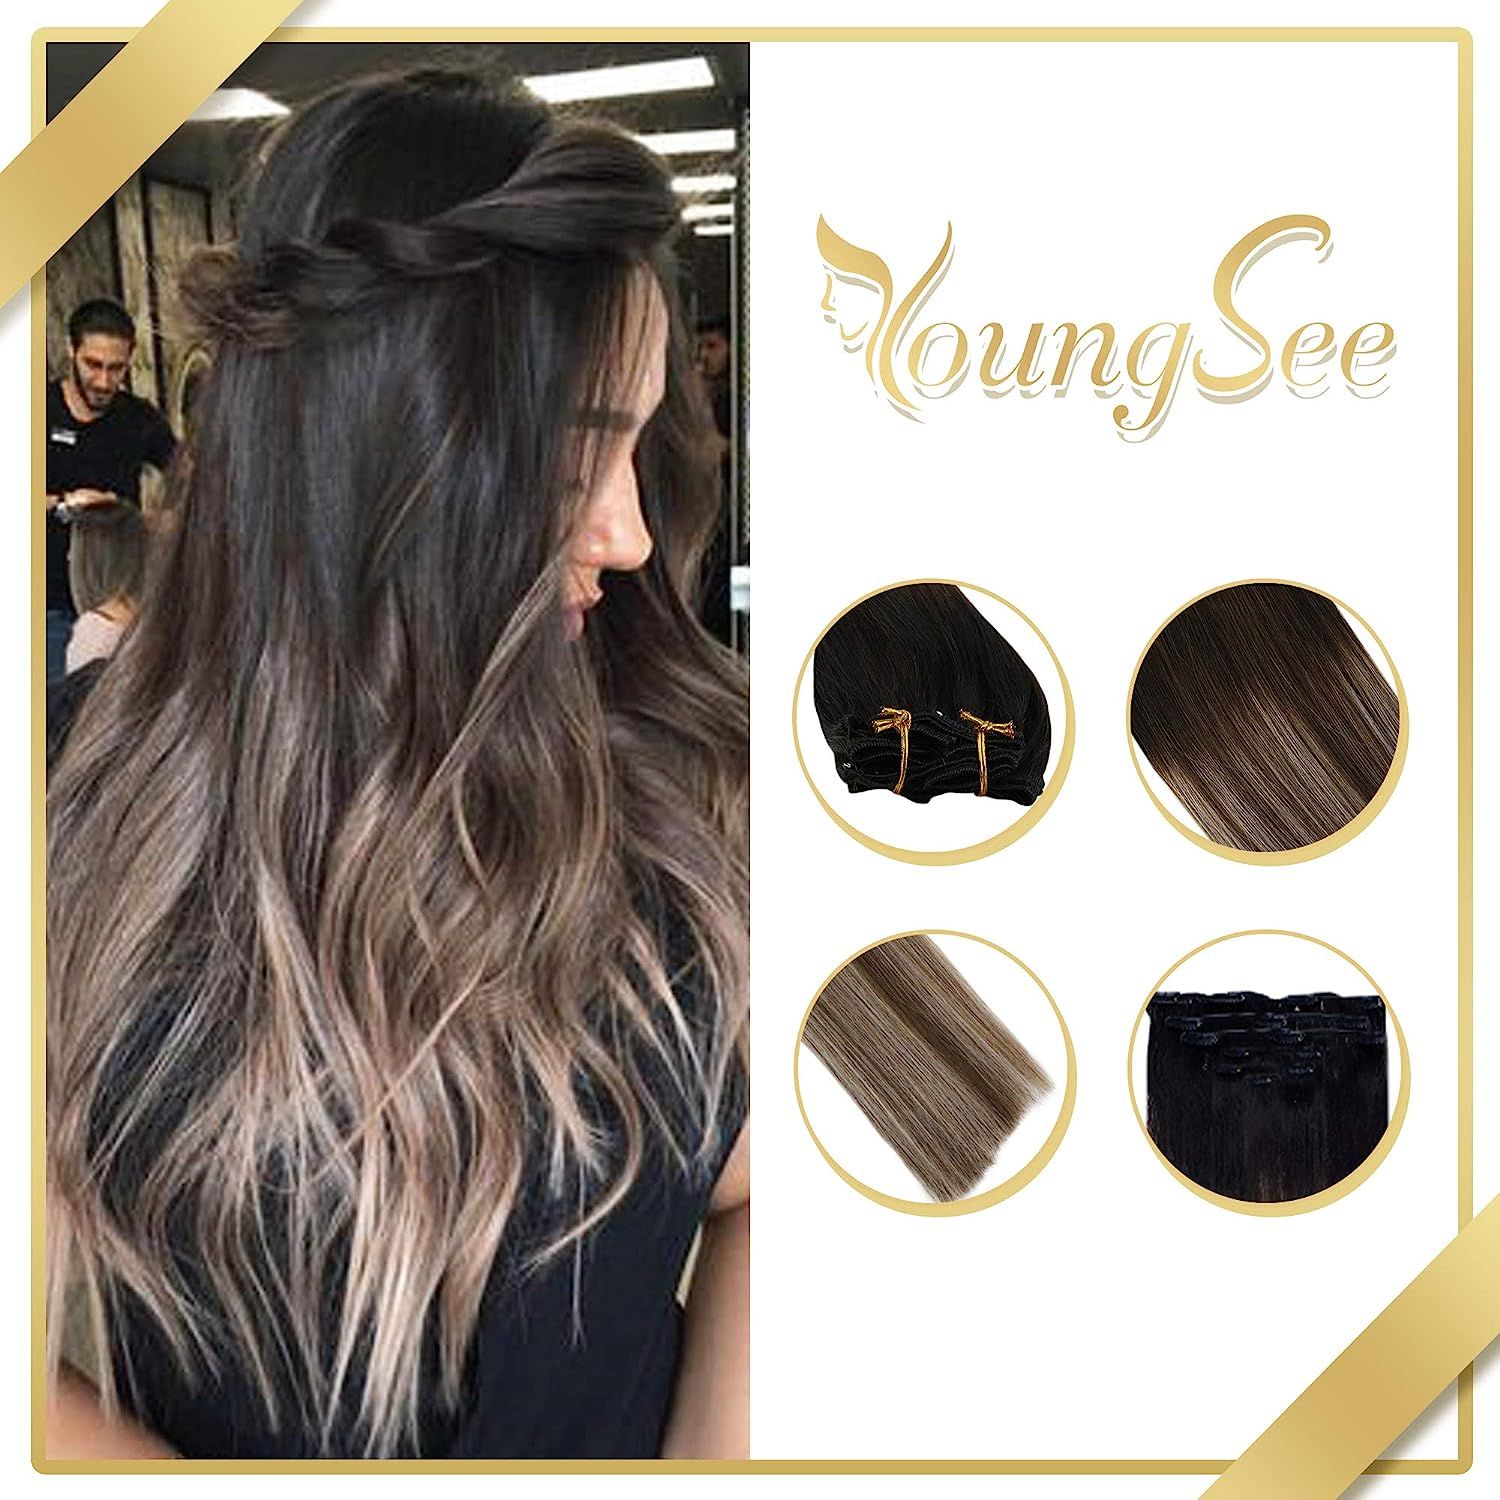 YoungSee 24inch Balayage Extensions Clip in Human Hair Dip Dyed Natural Black Fading to Dark Brow... | Amazon (US)